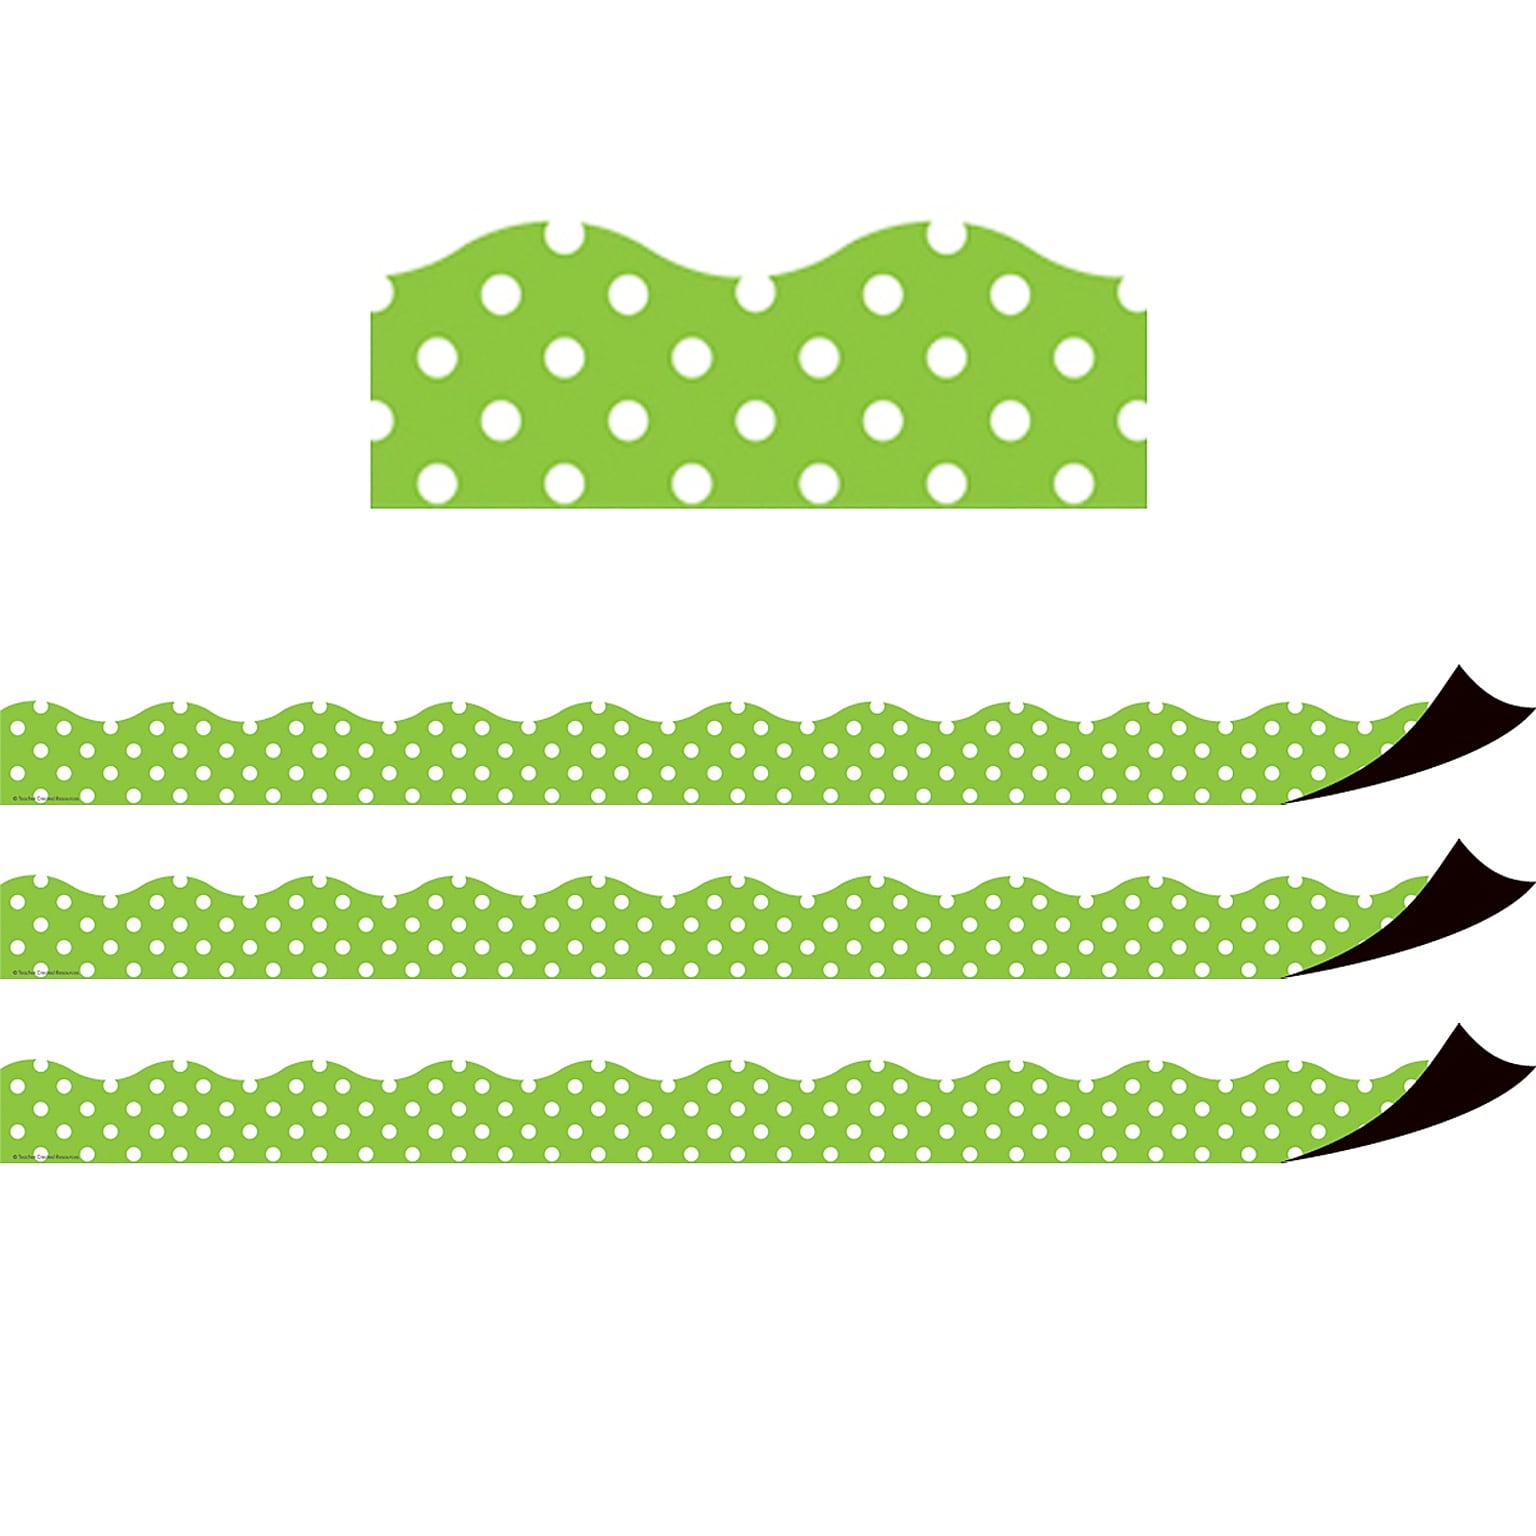 Teacher Created Resources Magnetic Borders, Lime Polka Dots, 24 Feet Per Pack, 3 Packs (TCR77123-3)